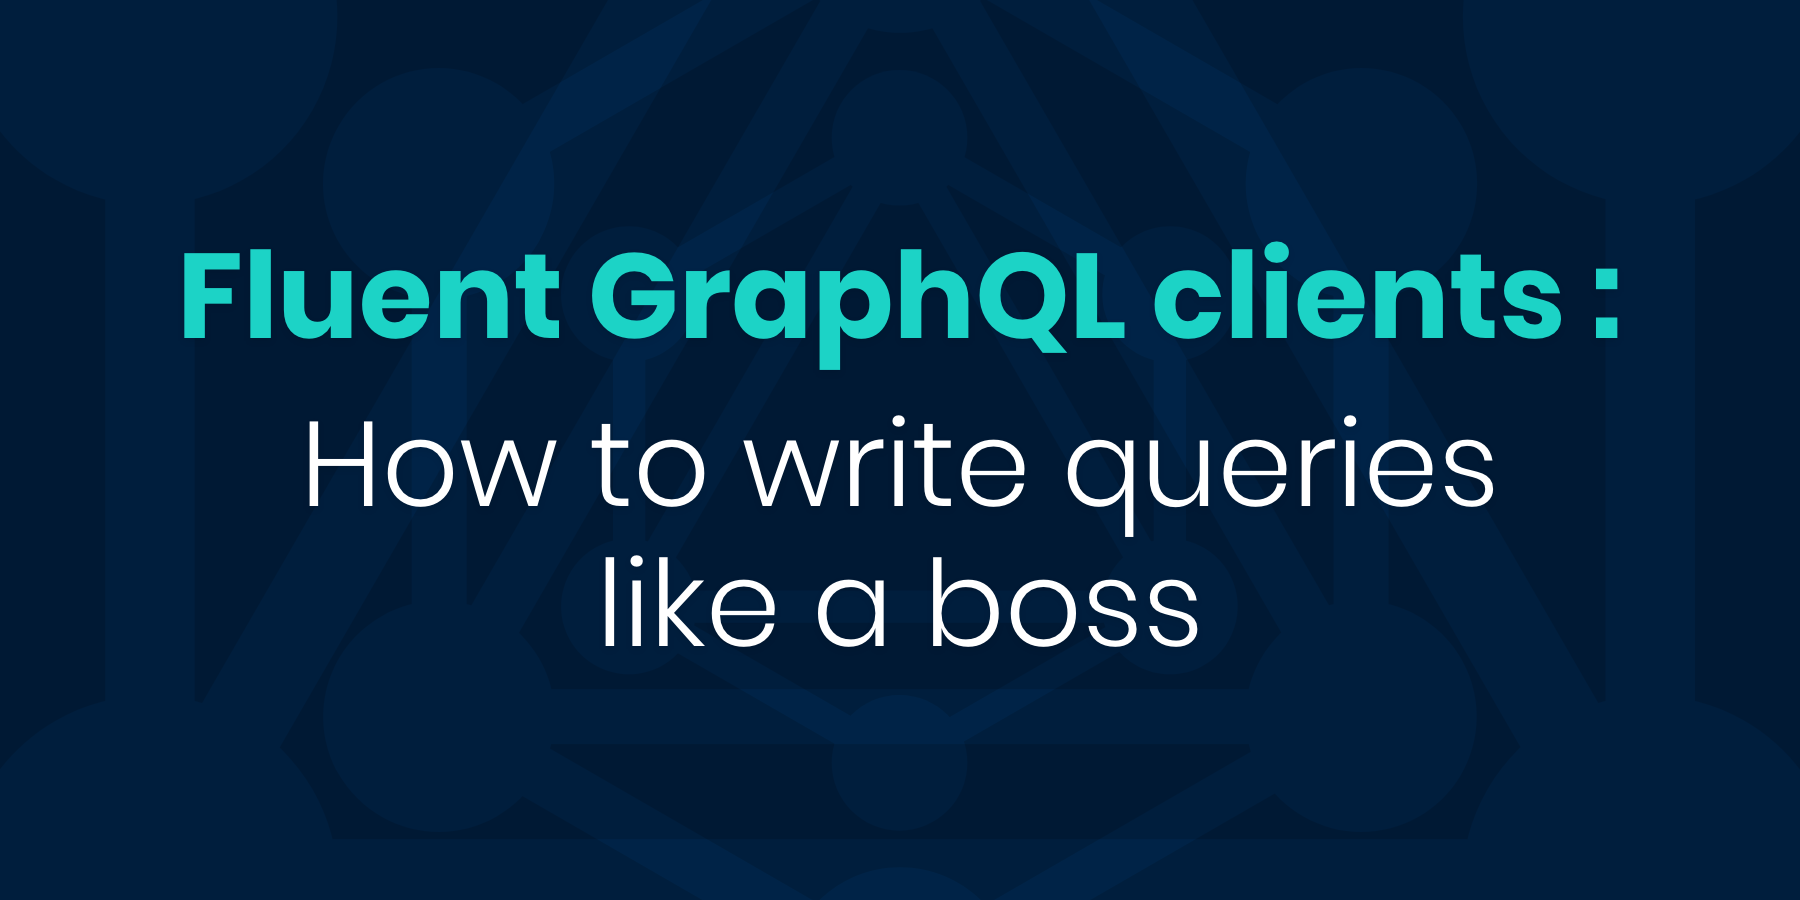 Fluent GraphQL clients: how to write queries like a boss